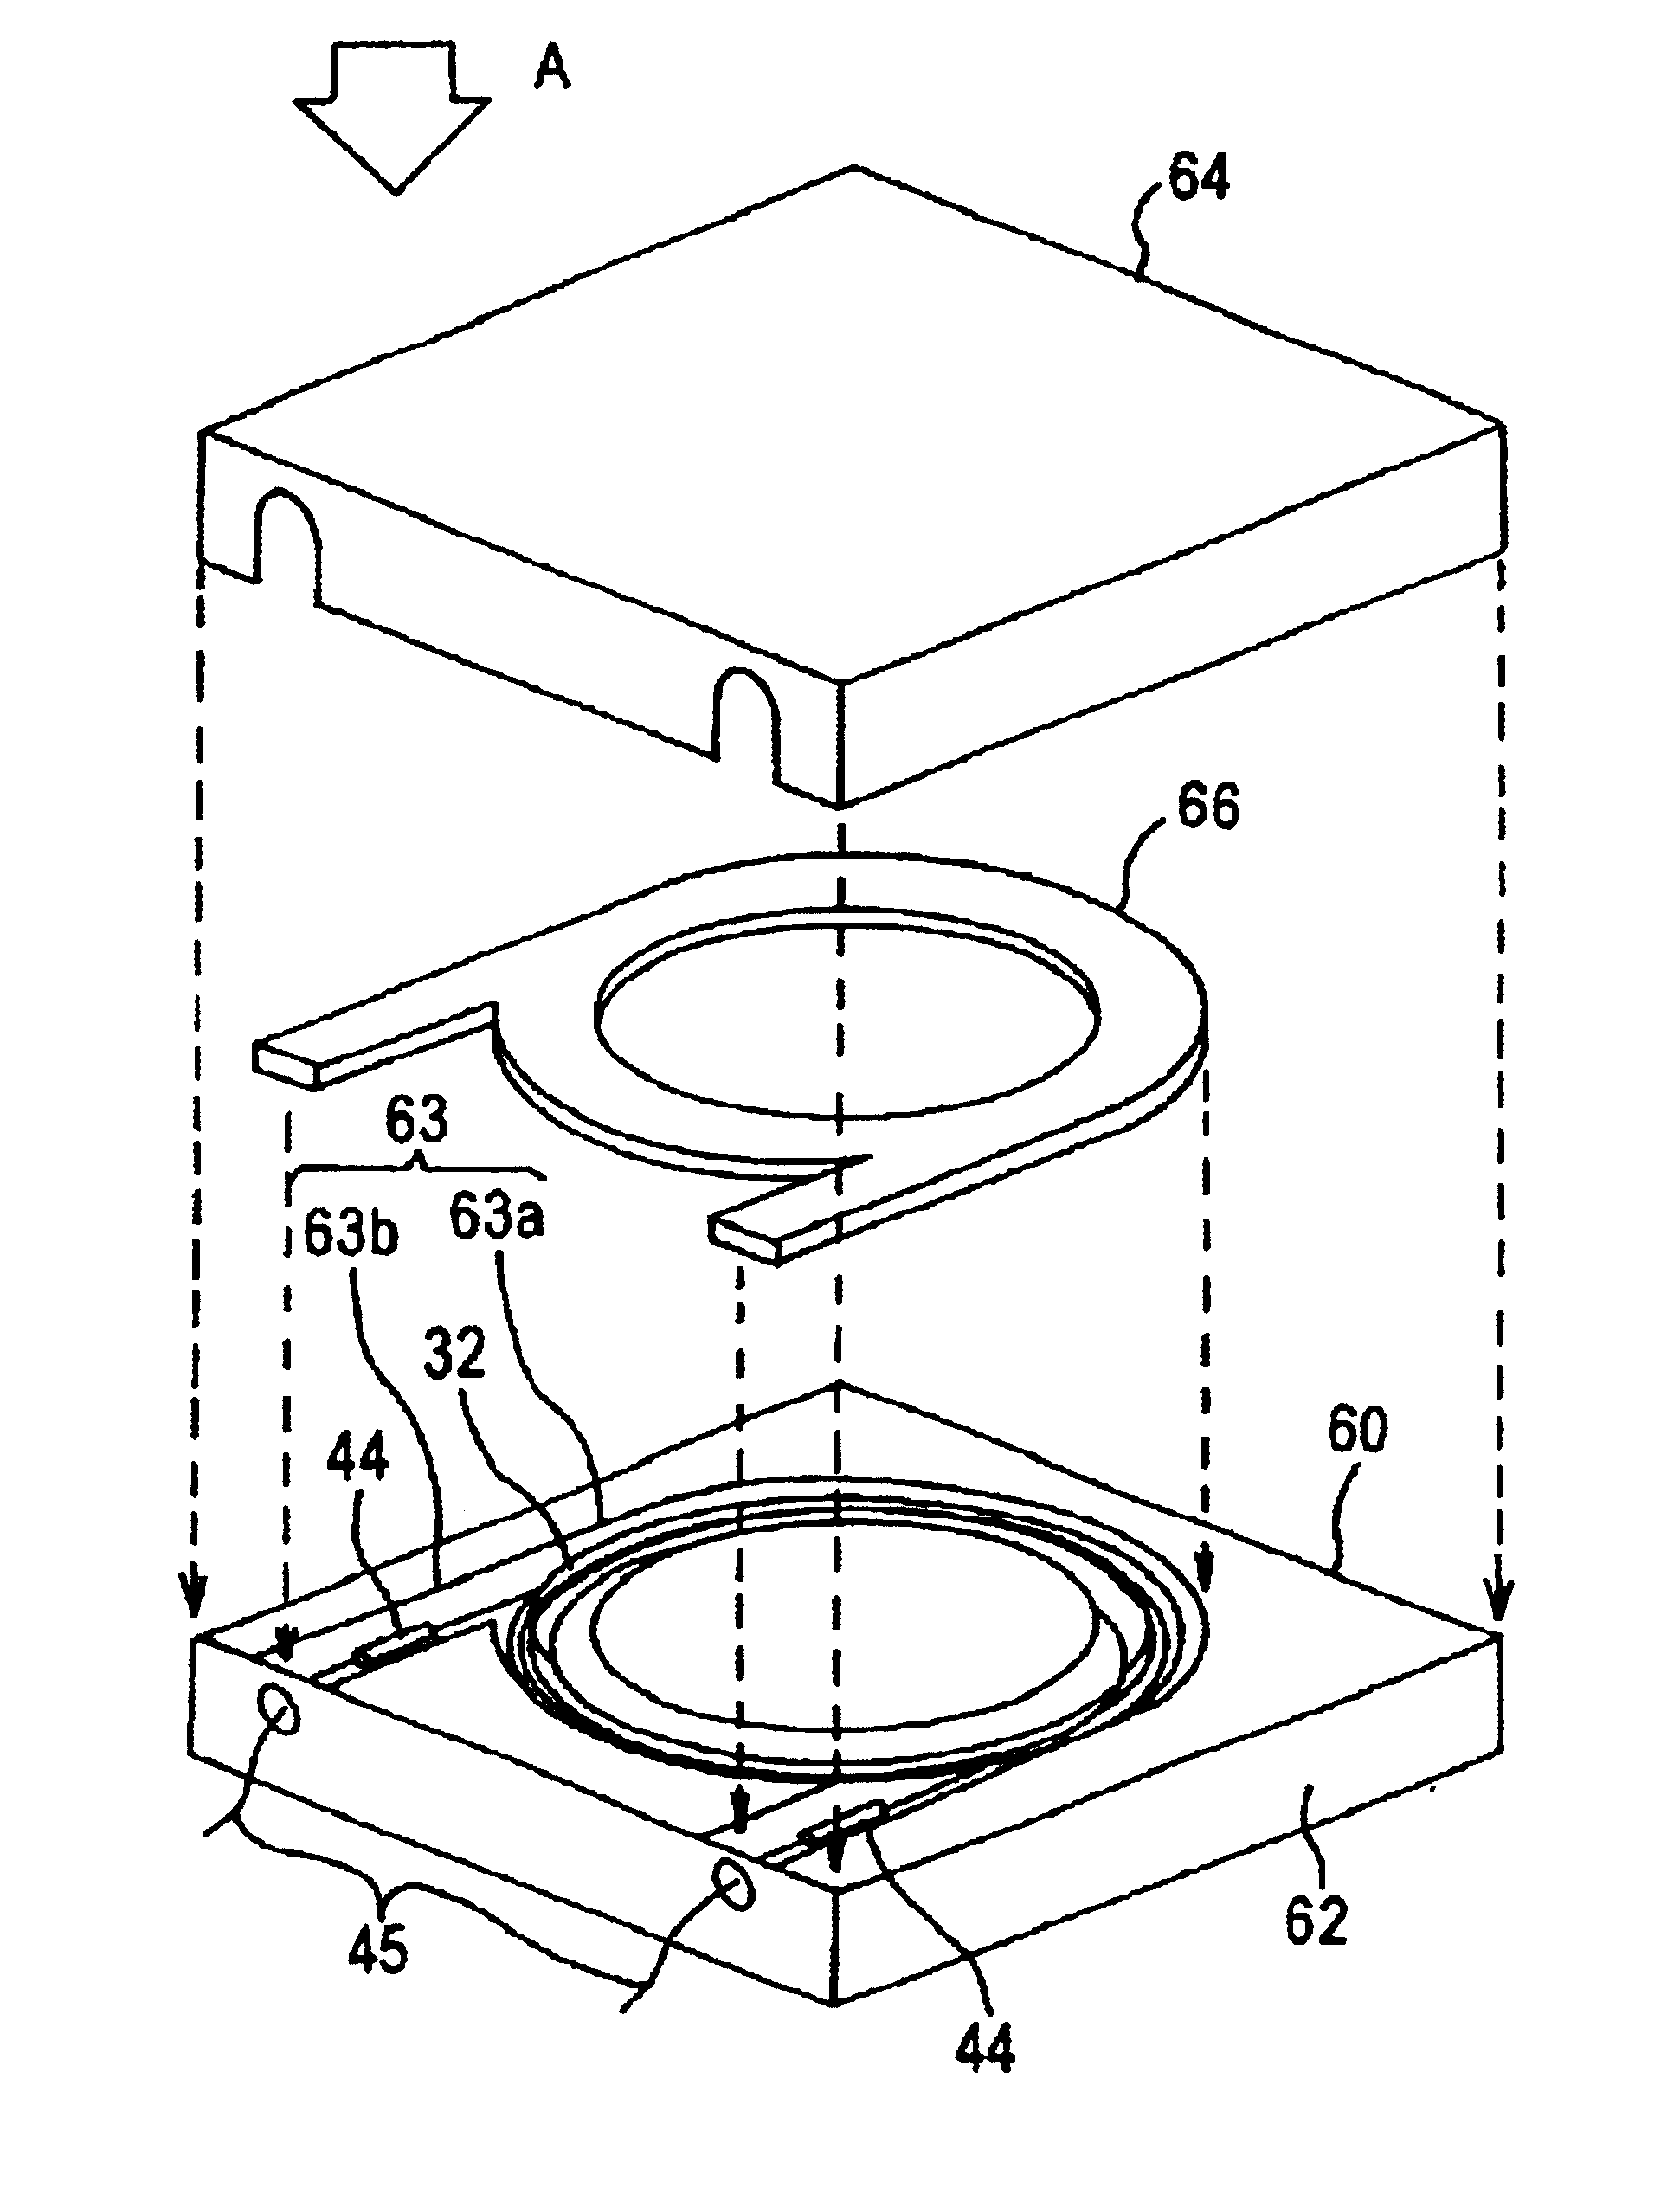 Optical device and a making method thereof